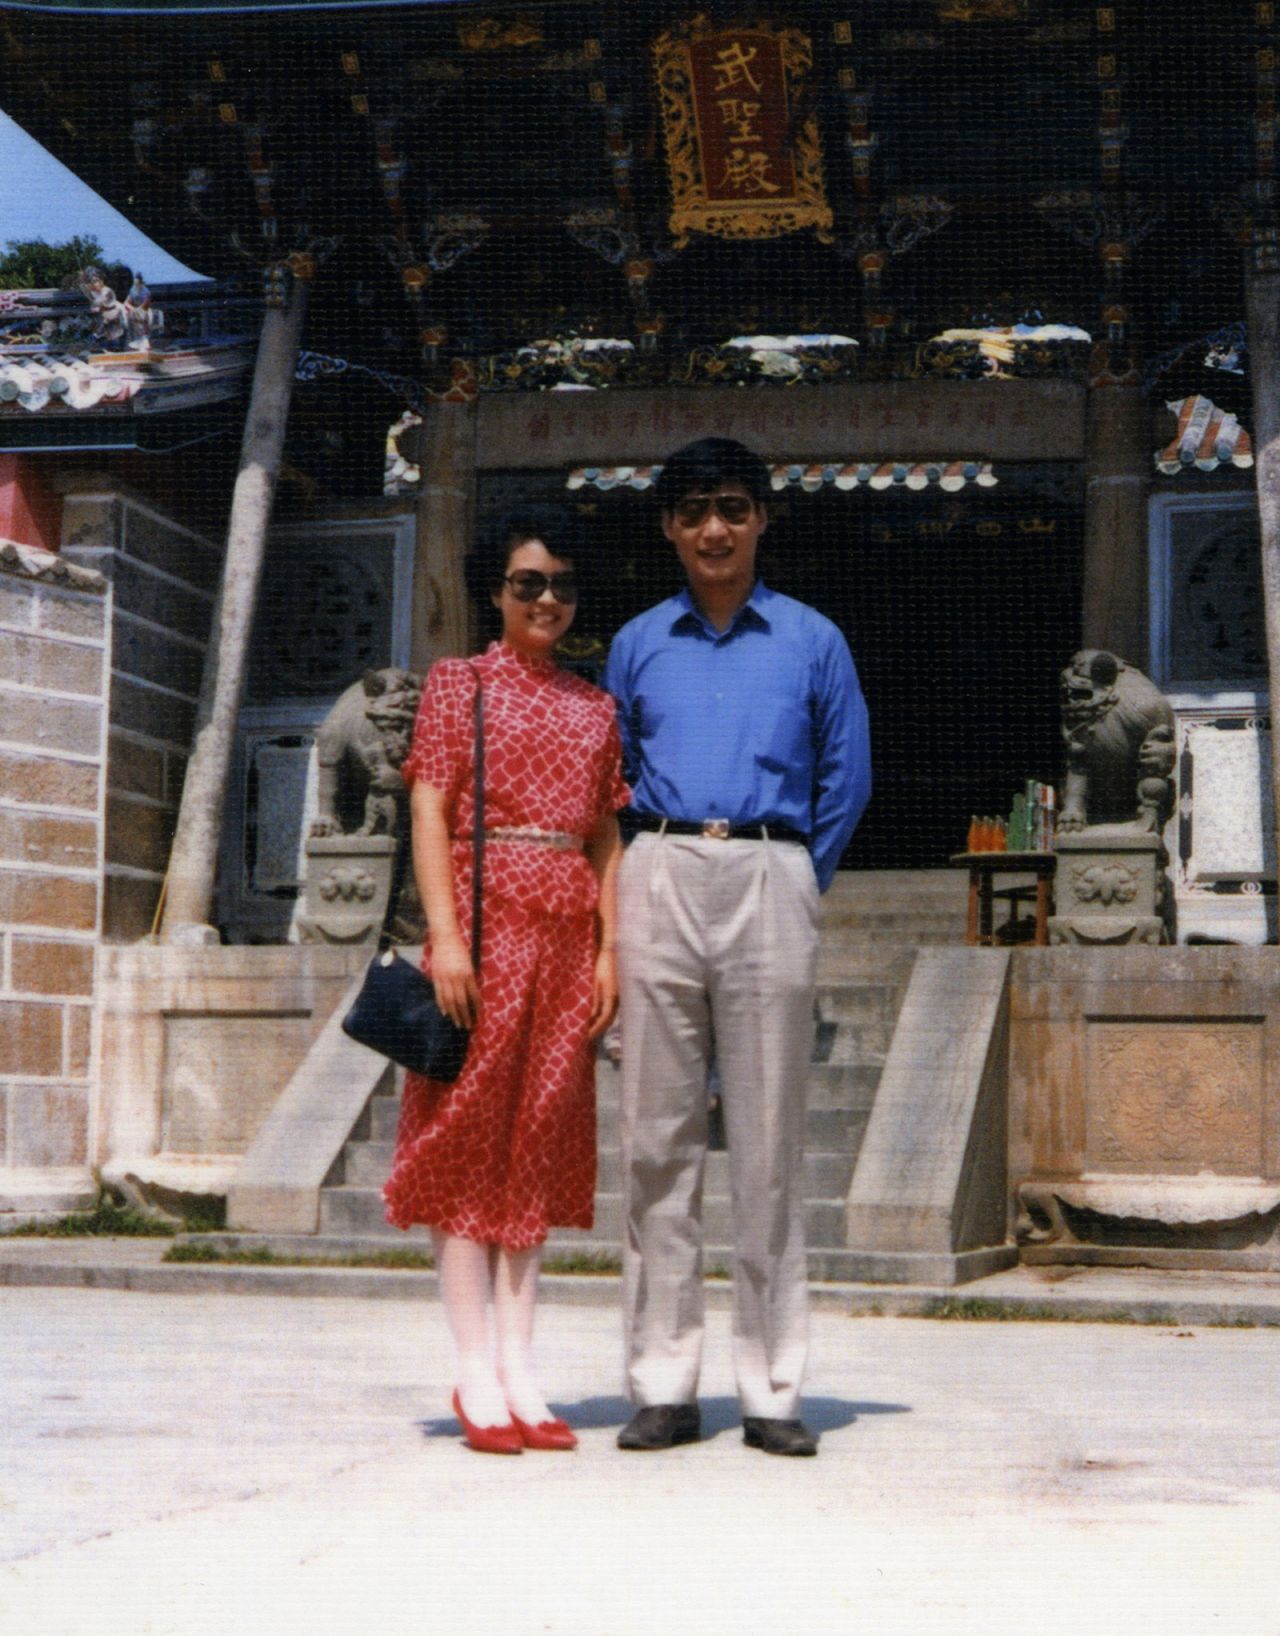 Xi and his new wife, folk singer Peng Liyuan, pose for a photo on China's Dongshan Island in 1987.